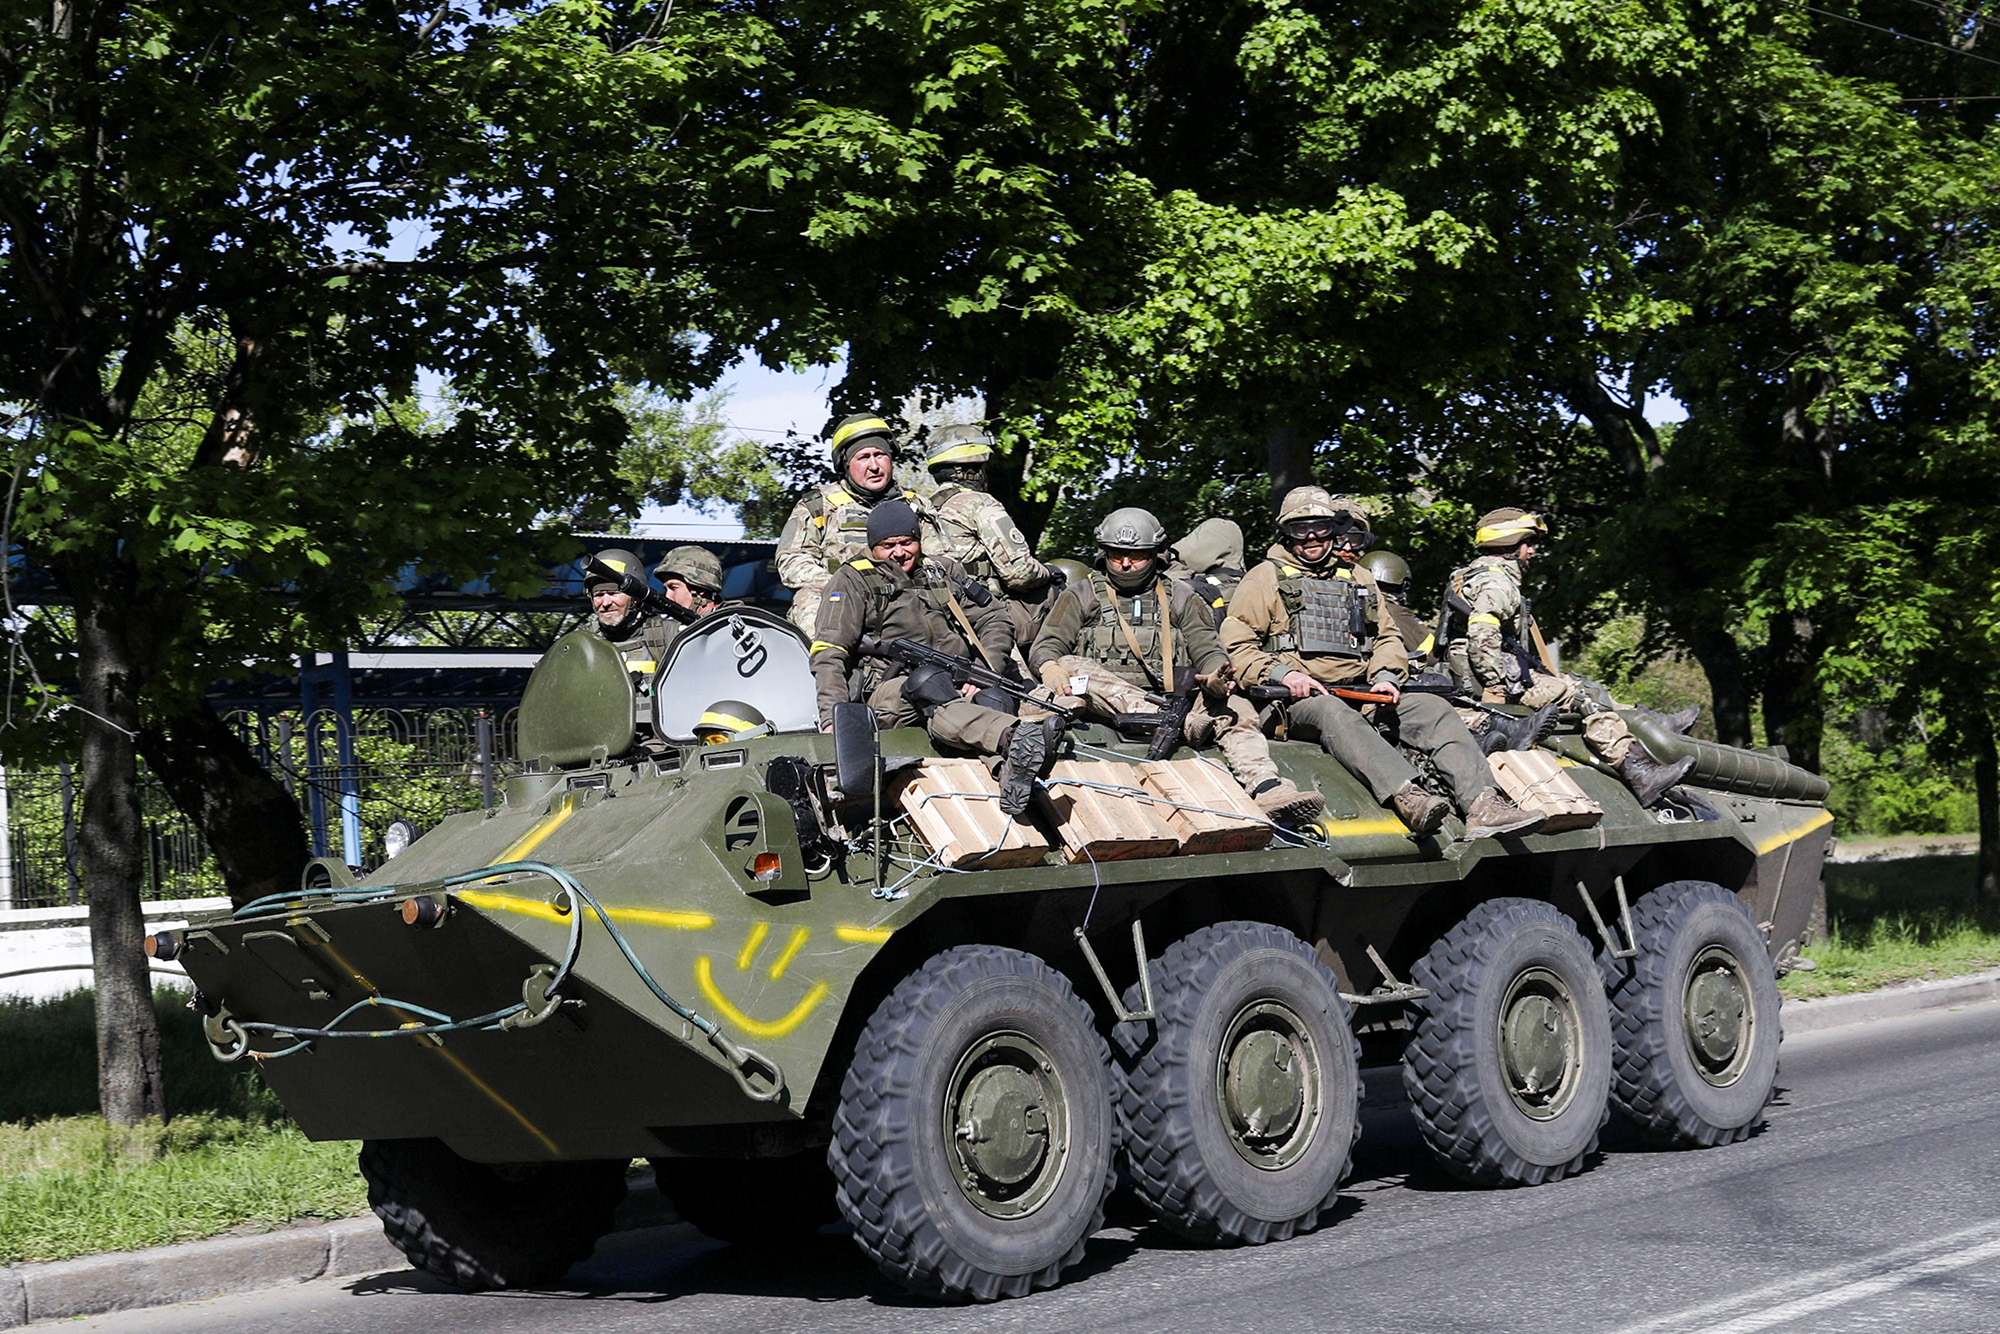 Ukrainian service personnel ride on top of an armoured vehicle amid Russia's attack on Ukraine, in Kharkiv, Ukraine, on May 16.